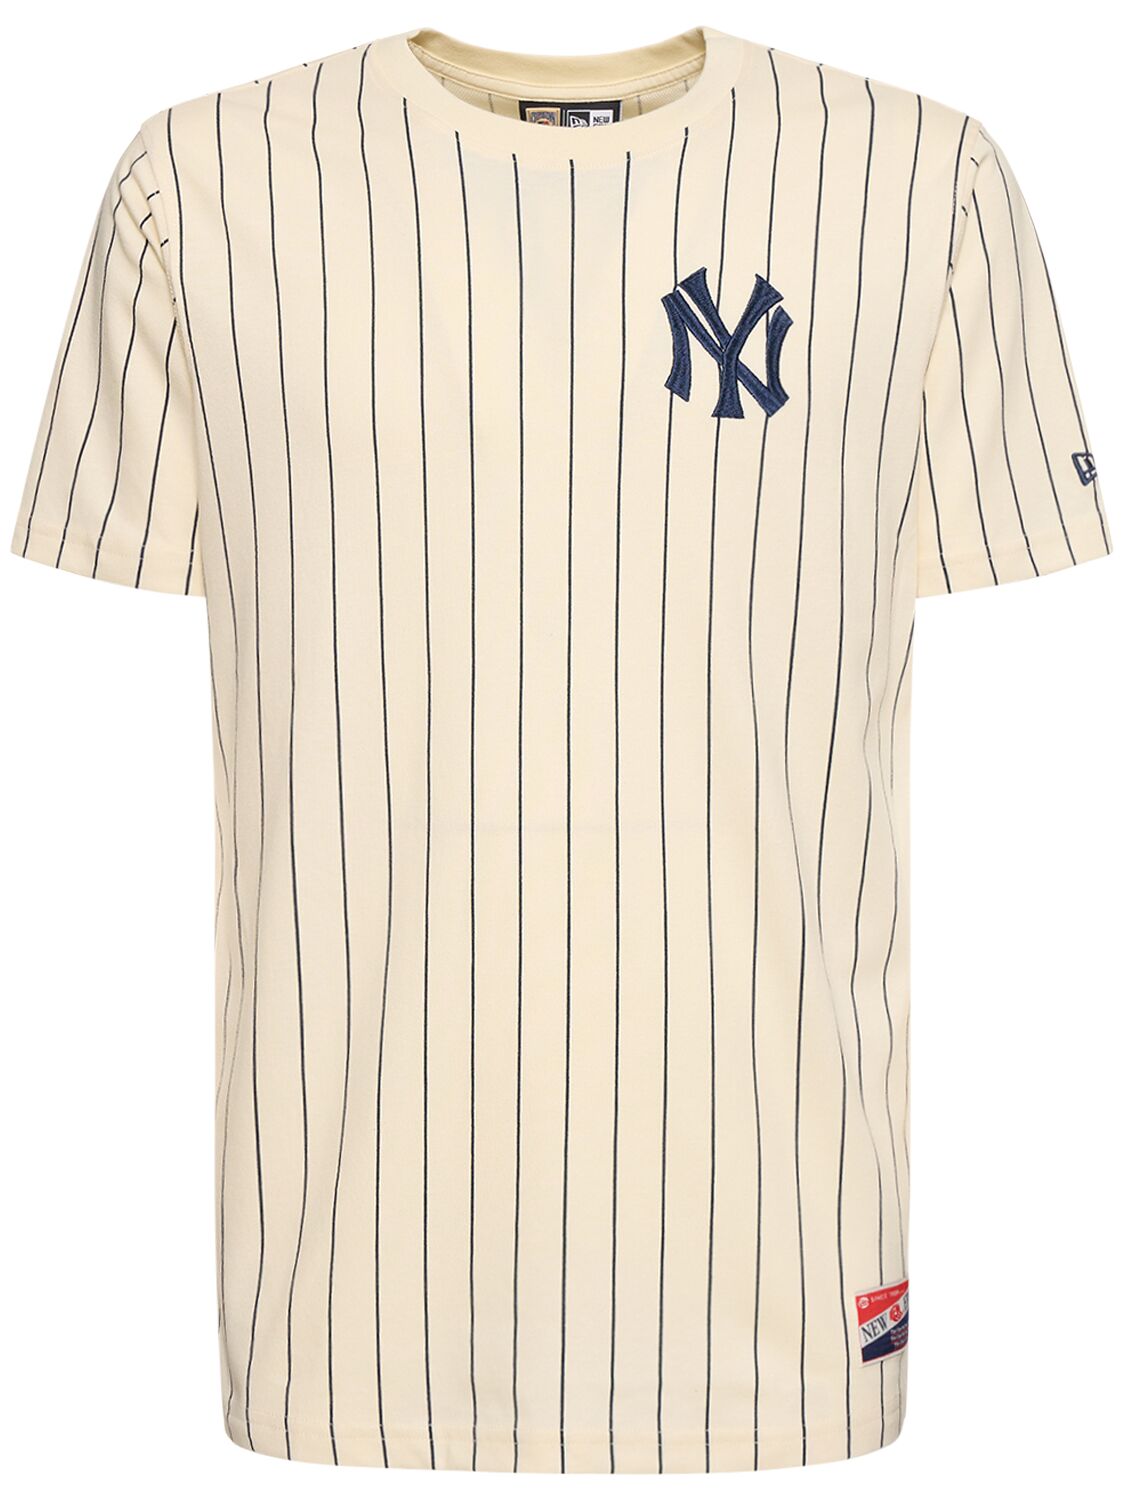 Image of Cooperstown New York Yankees T-shirt